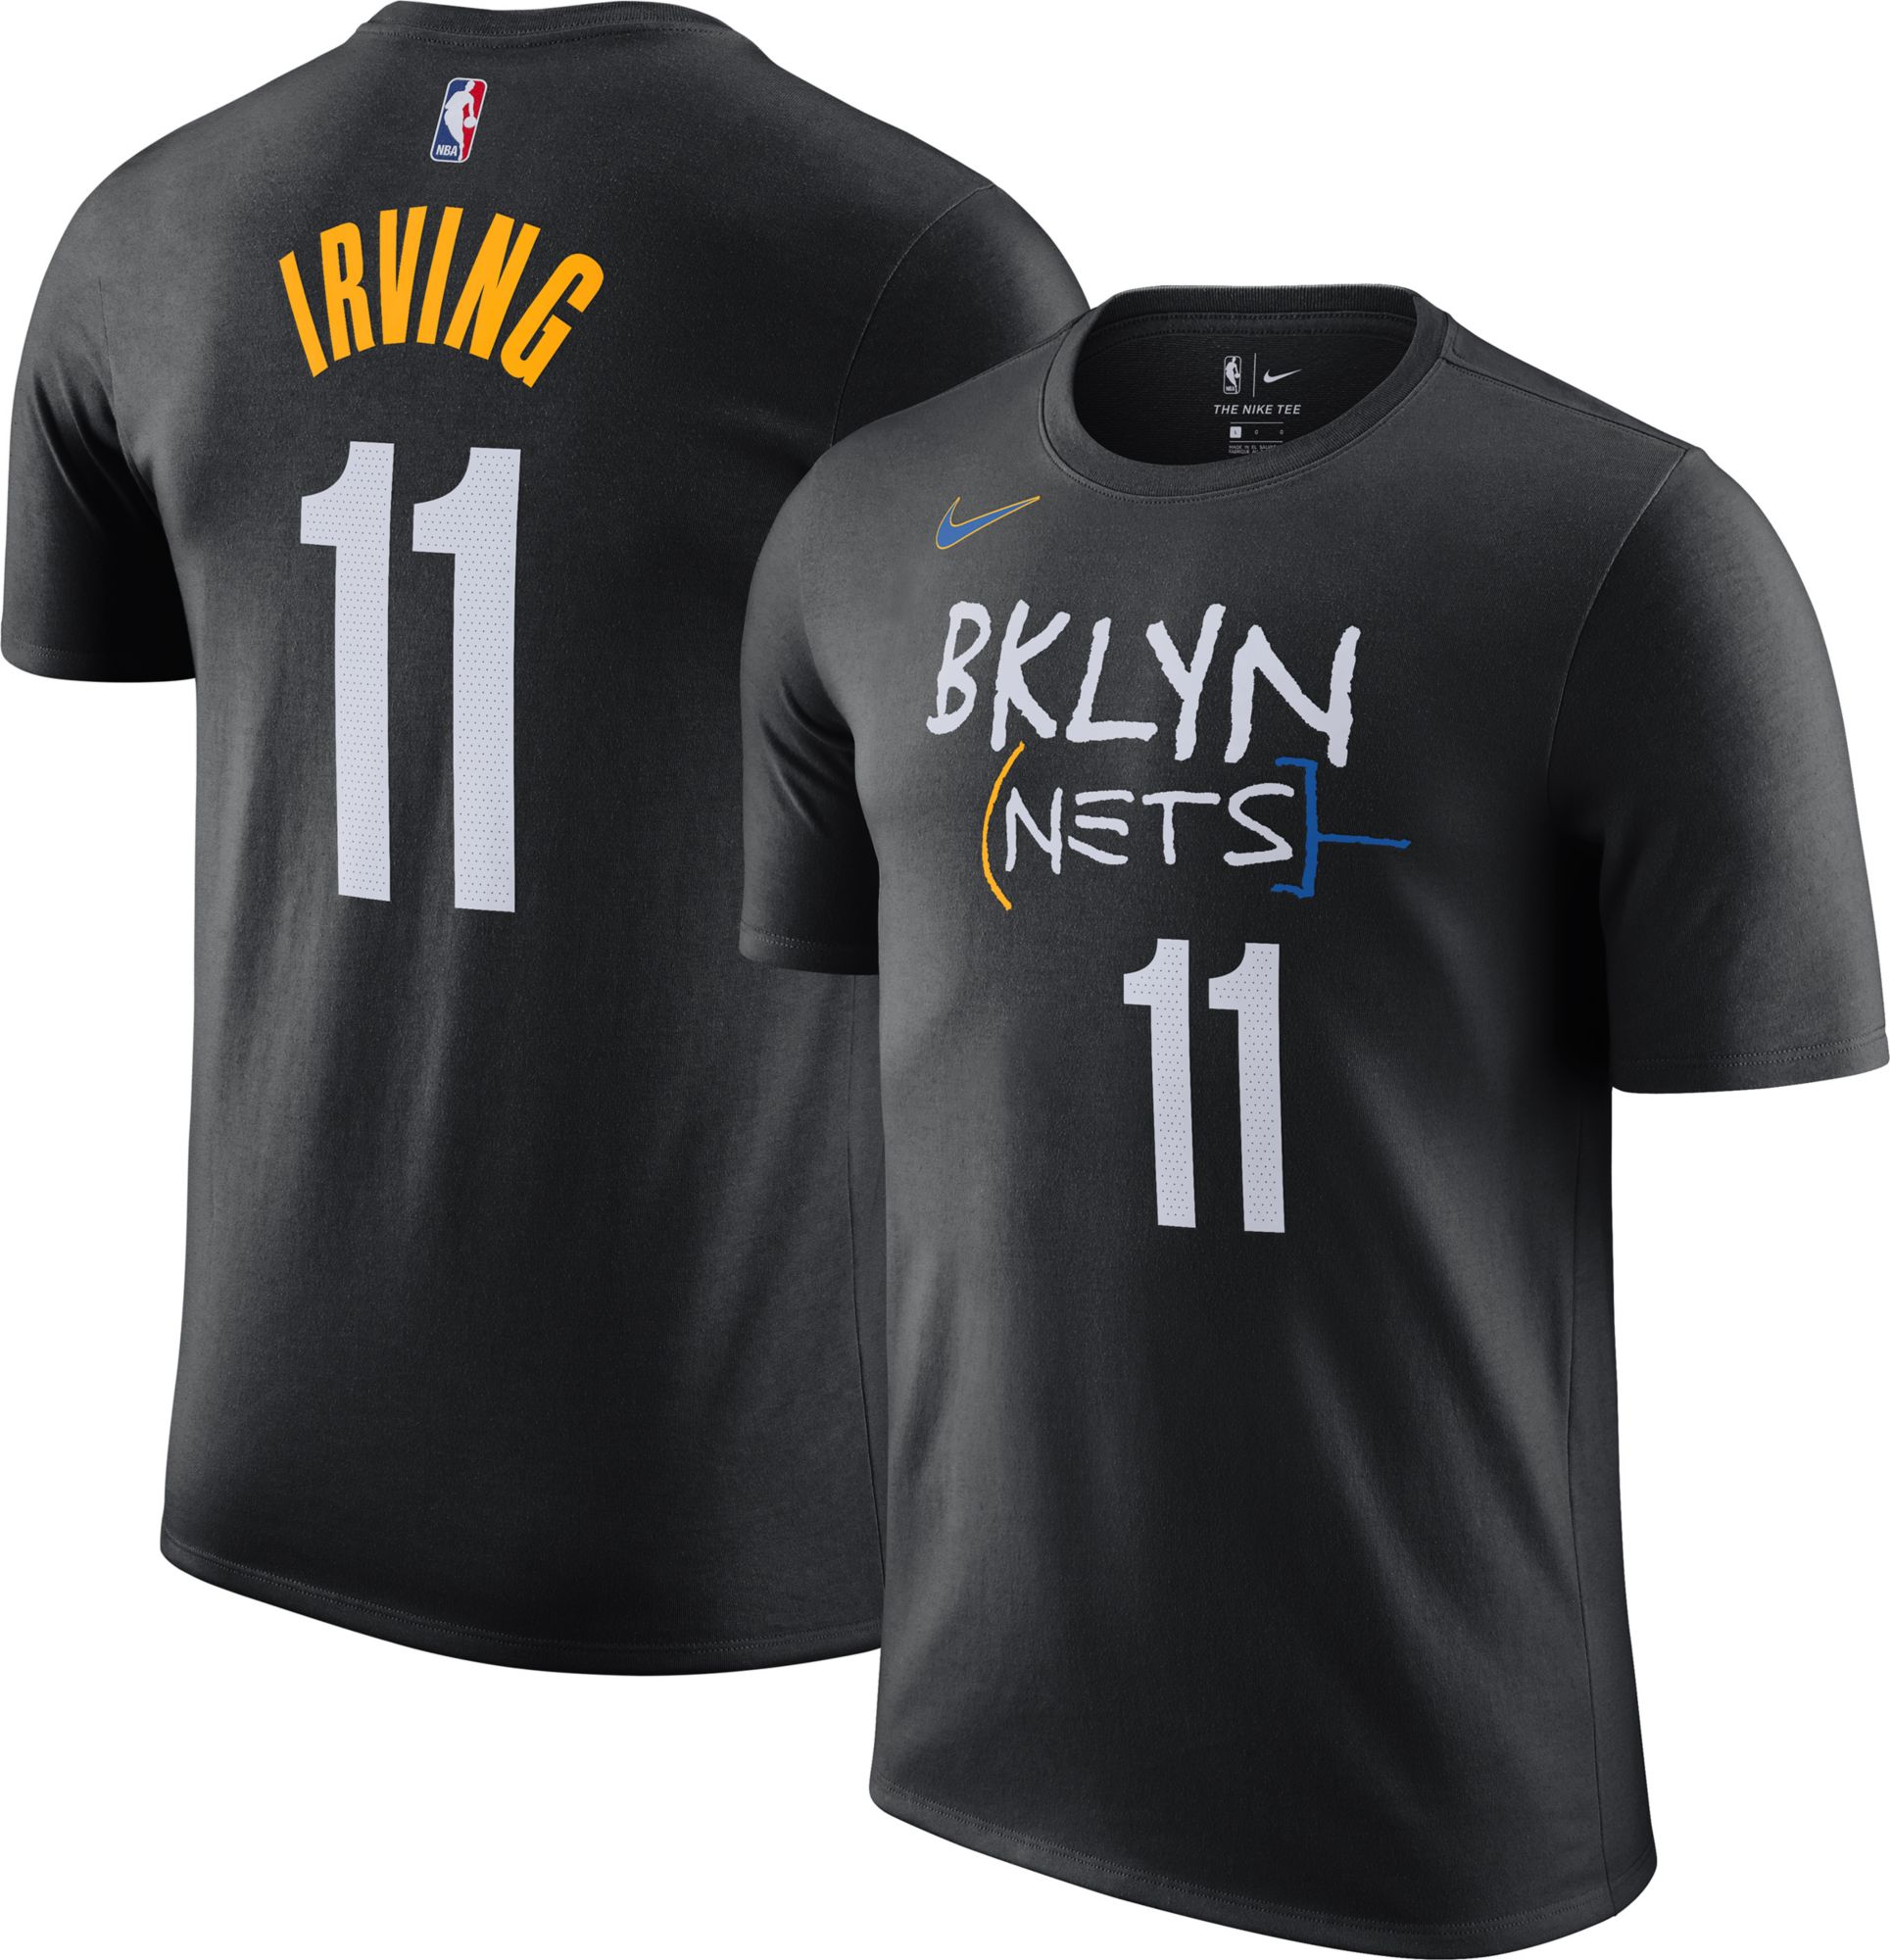 Nike / Youth 2021-22 City Edition Brooklyn Nets Kyrie Irving #11